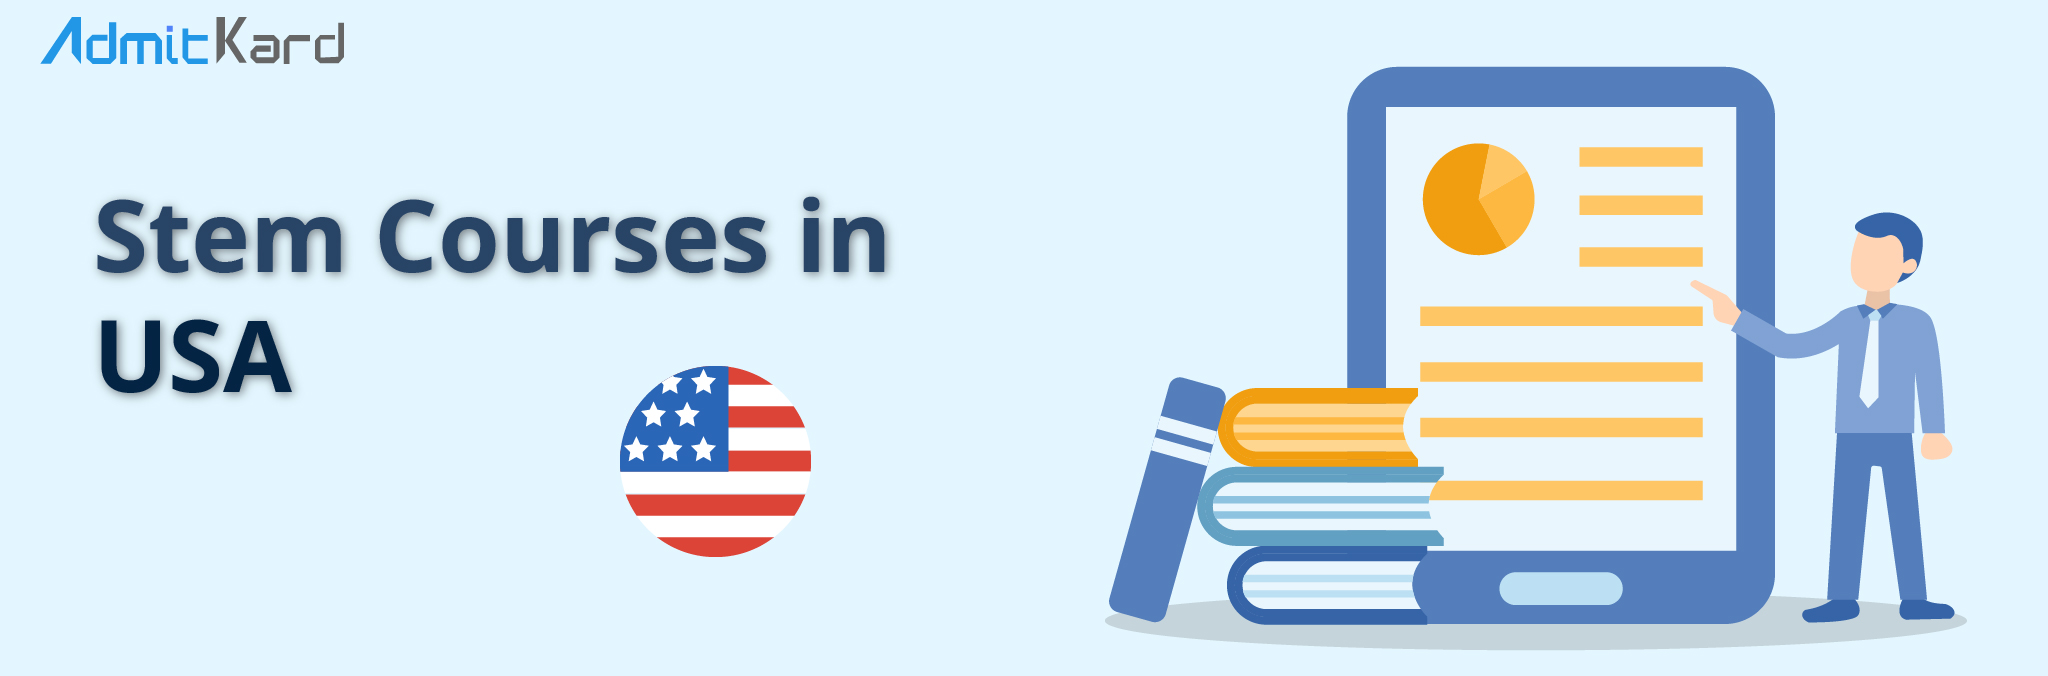 stem courses in usa